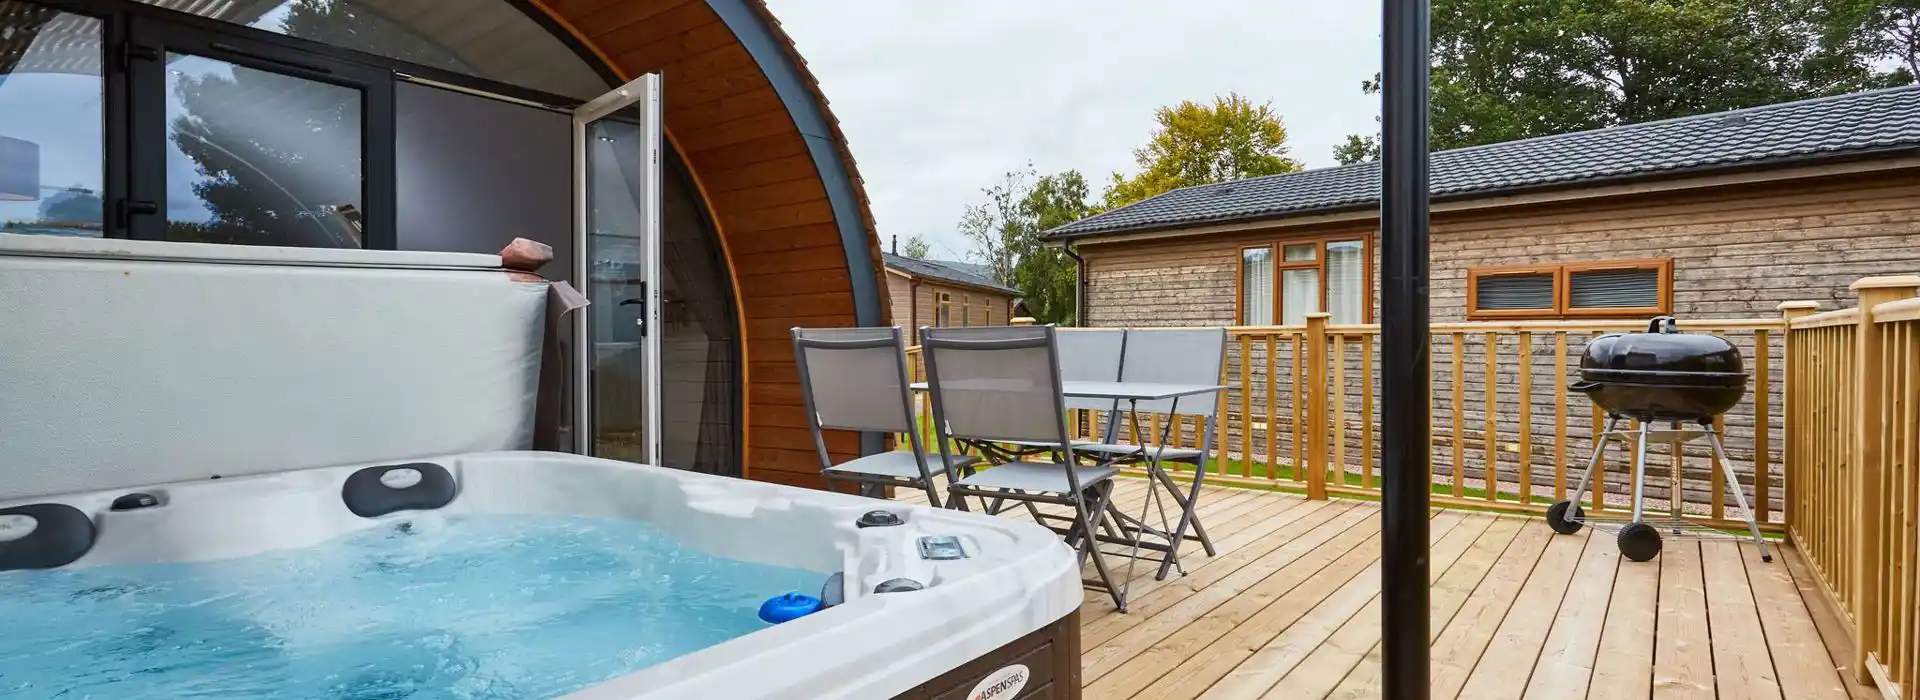 Camping pods in Scotland